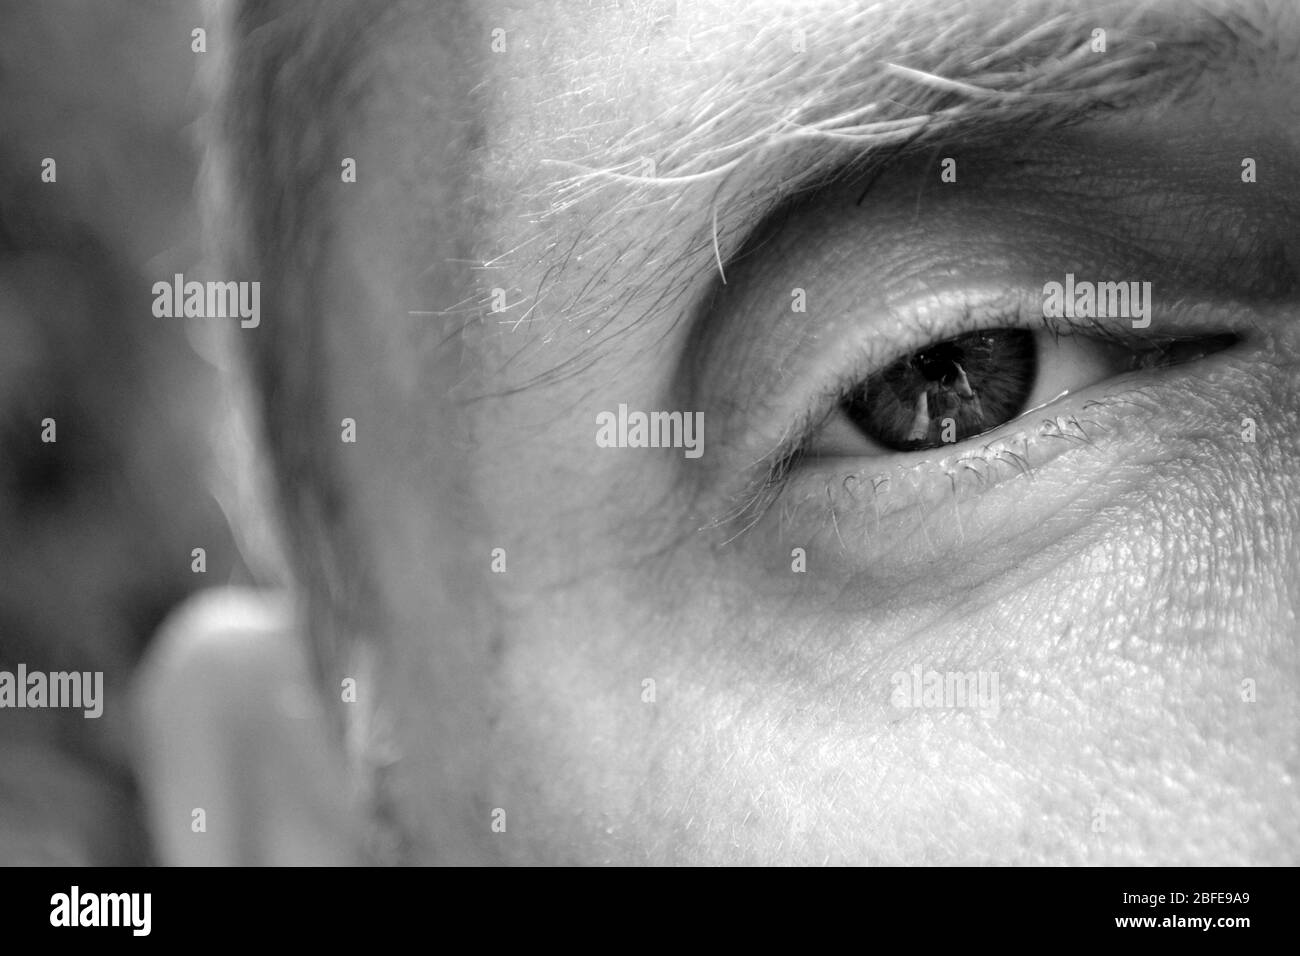 Close up of man's eye and face - black and white photograph Stock Photo